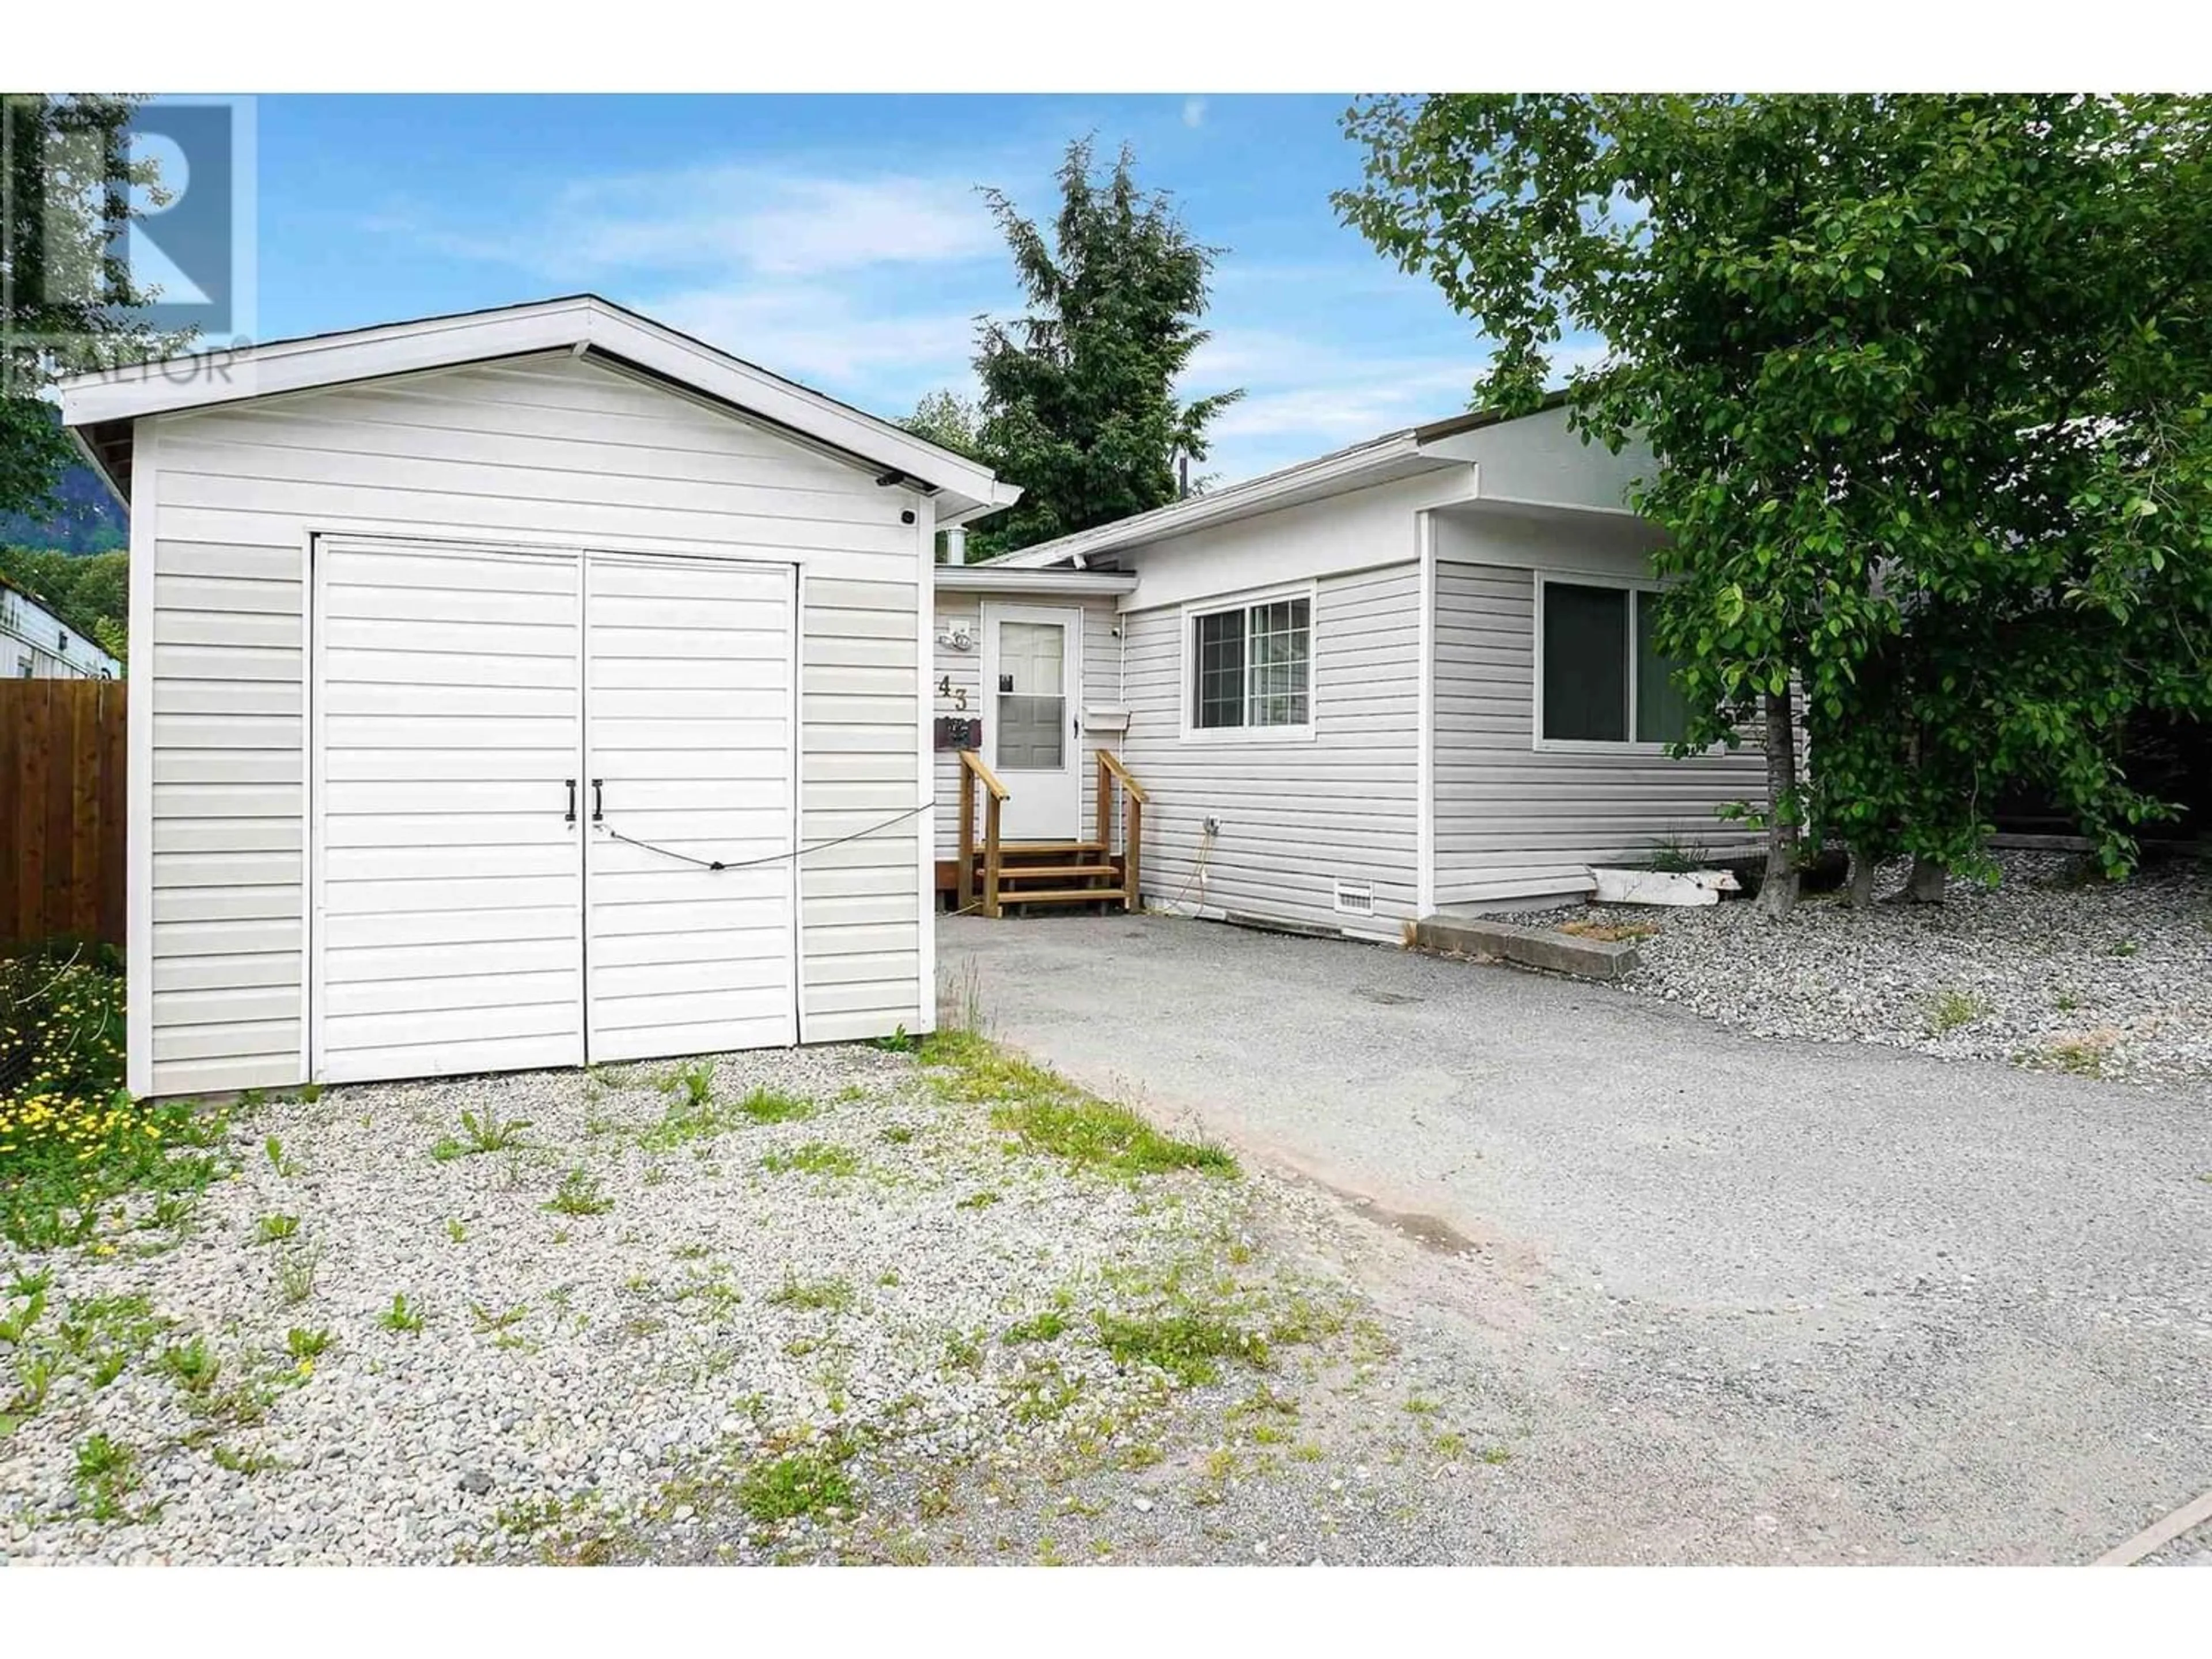 A pic from exterior of the house or condo for 43 584 COLUMBIA AVENUE, Kitimat British Columbia V8C1V3